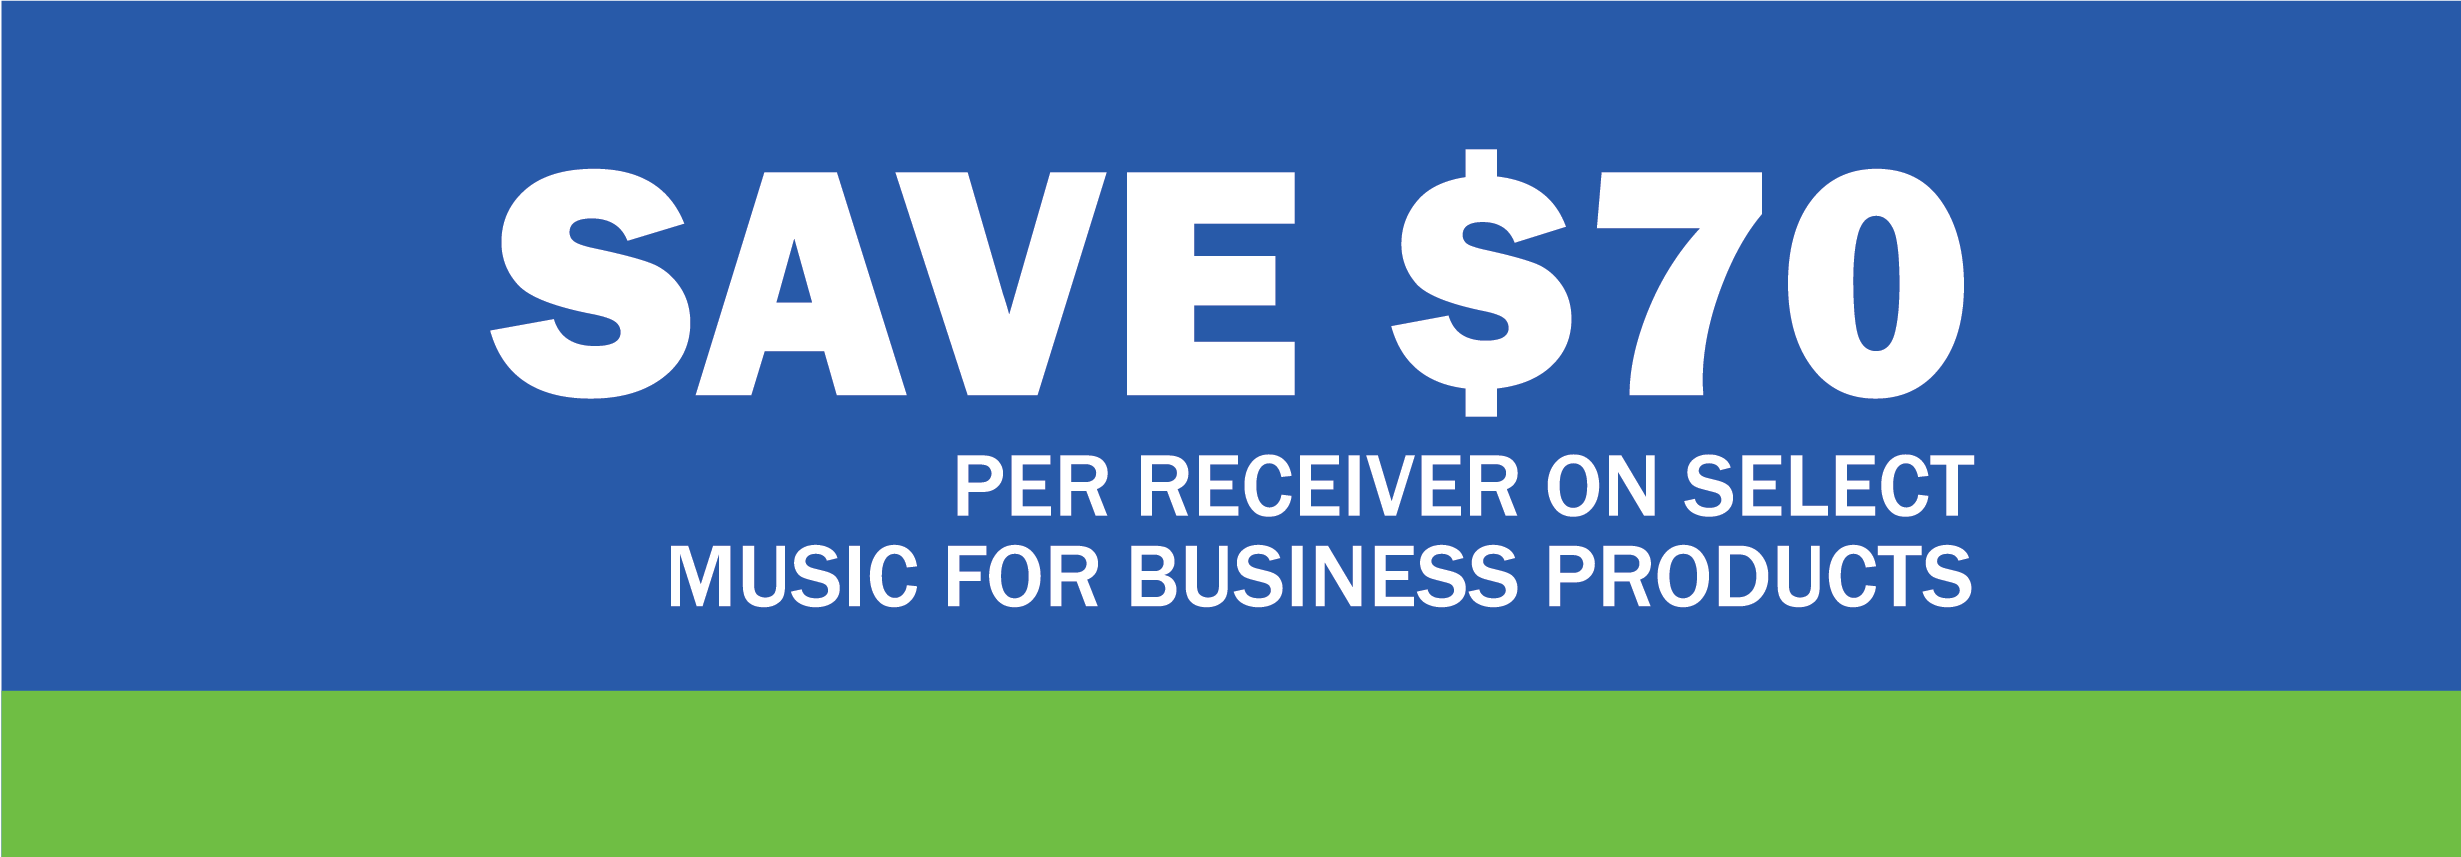 get-a-70-rebate-siriusxm-music-for-business